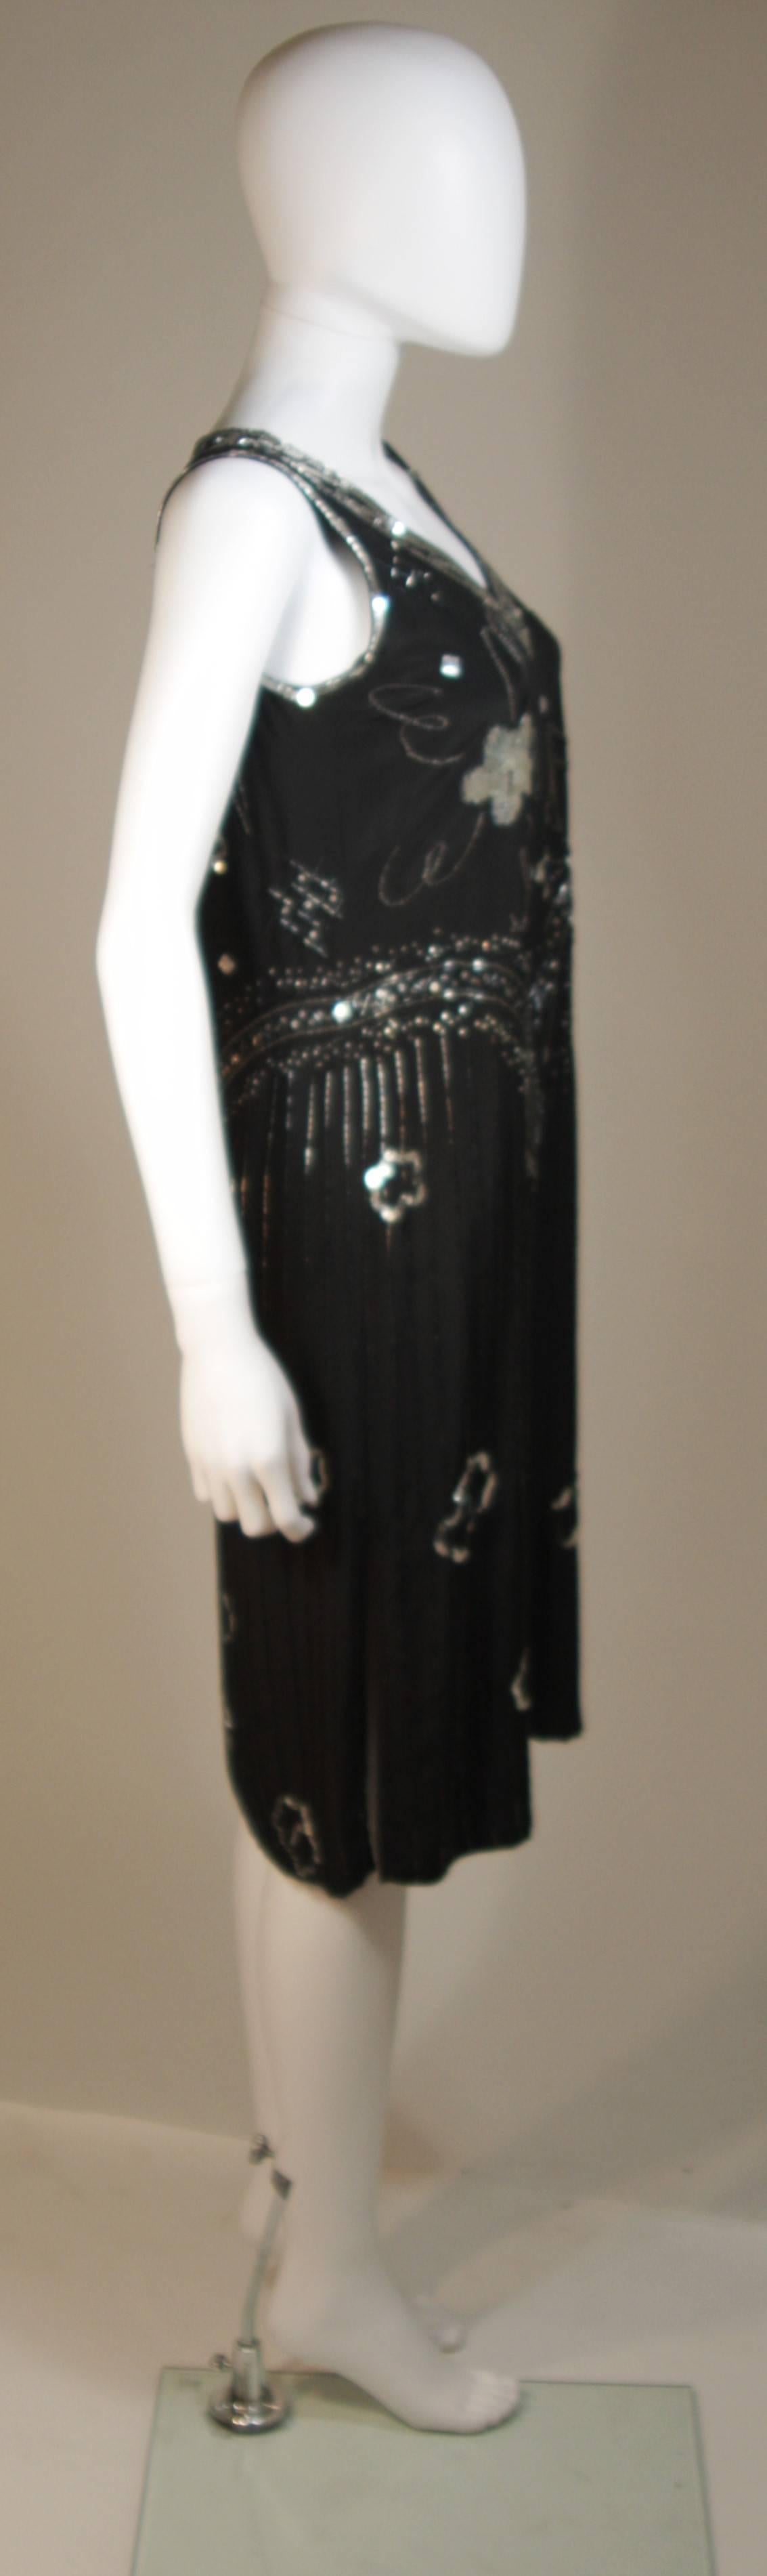 GIORGIO BEVERLY HILLS Sequin Embellished Deco Inspired Cocktail Dress Size 4-6 For Sale 1